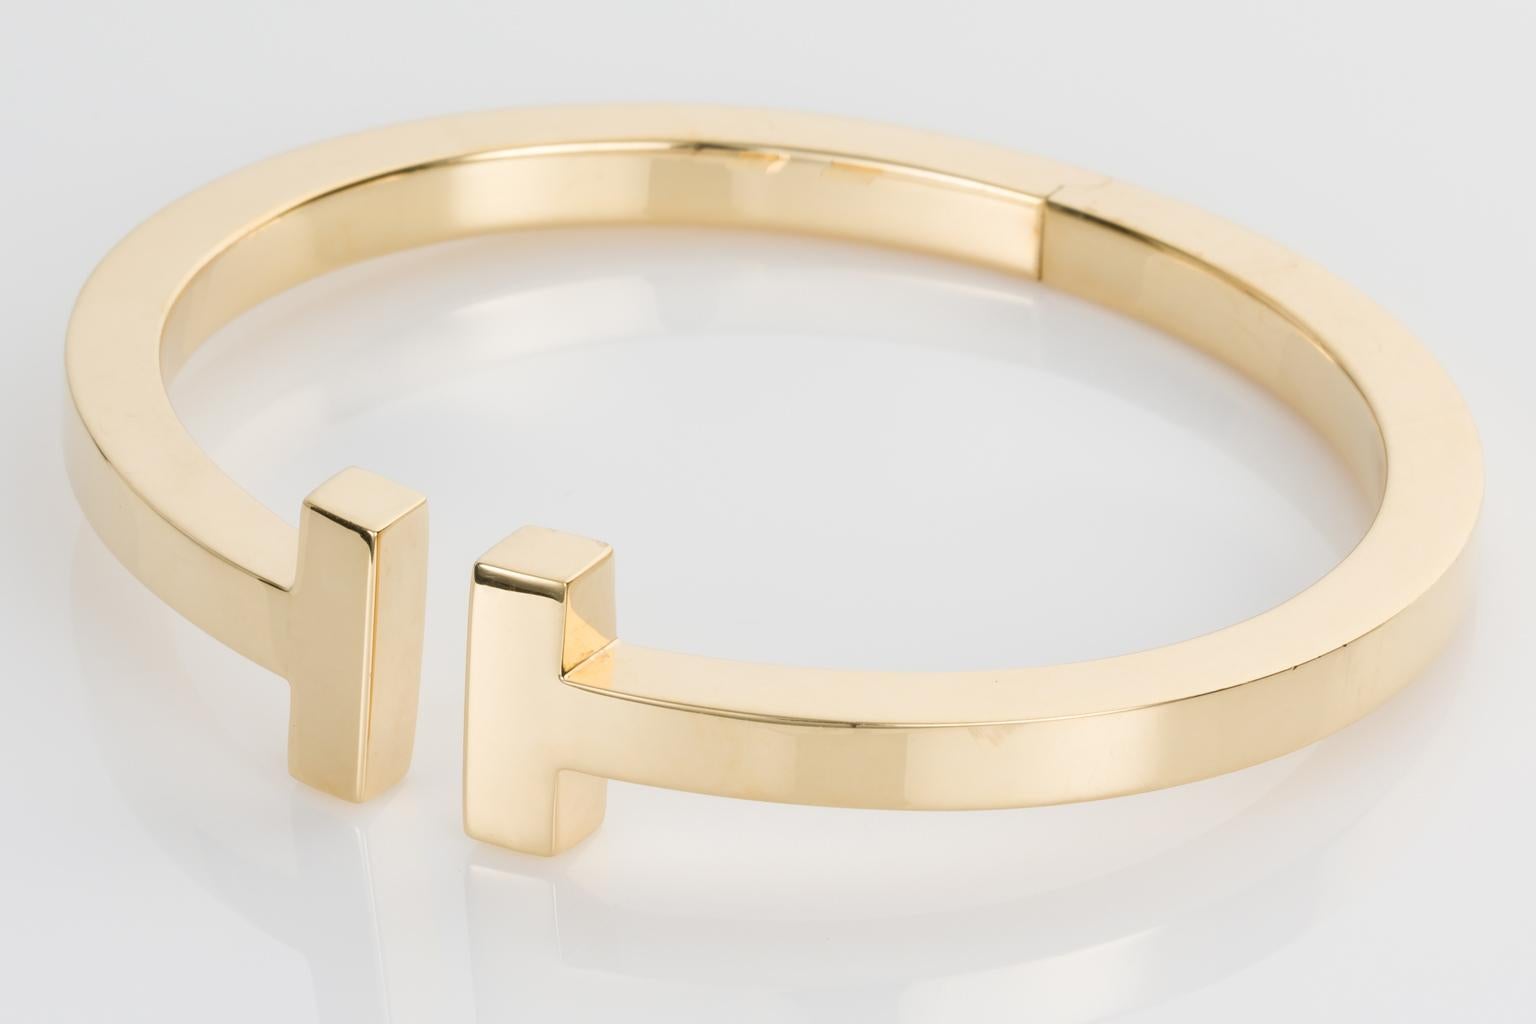 Tiffany & Co T Bangle in high polished 18k Yellow gold. This simplistic style has been extremely popular with many Tiffany collectors adding this bangle to their jewellery wardrobes. This bracelet opening measures 61 x 56mm (2.40 x 2.20 inches) and